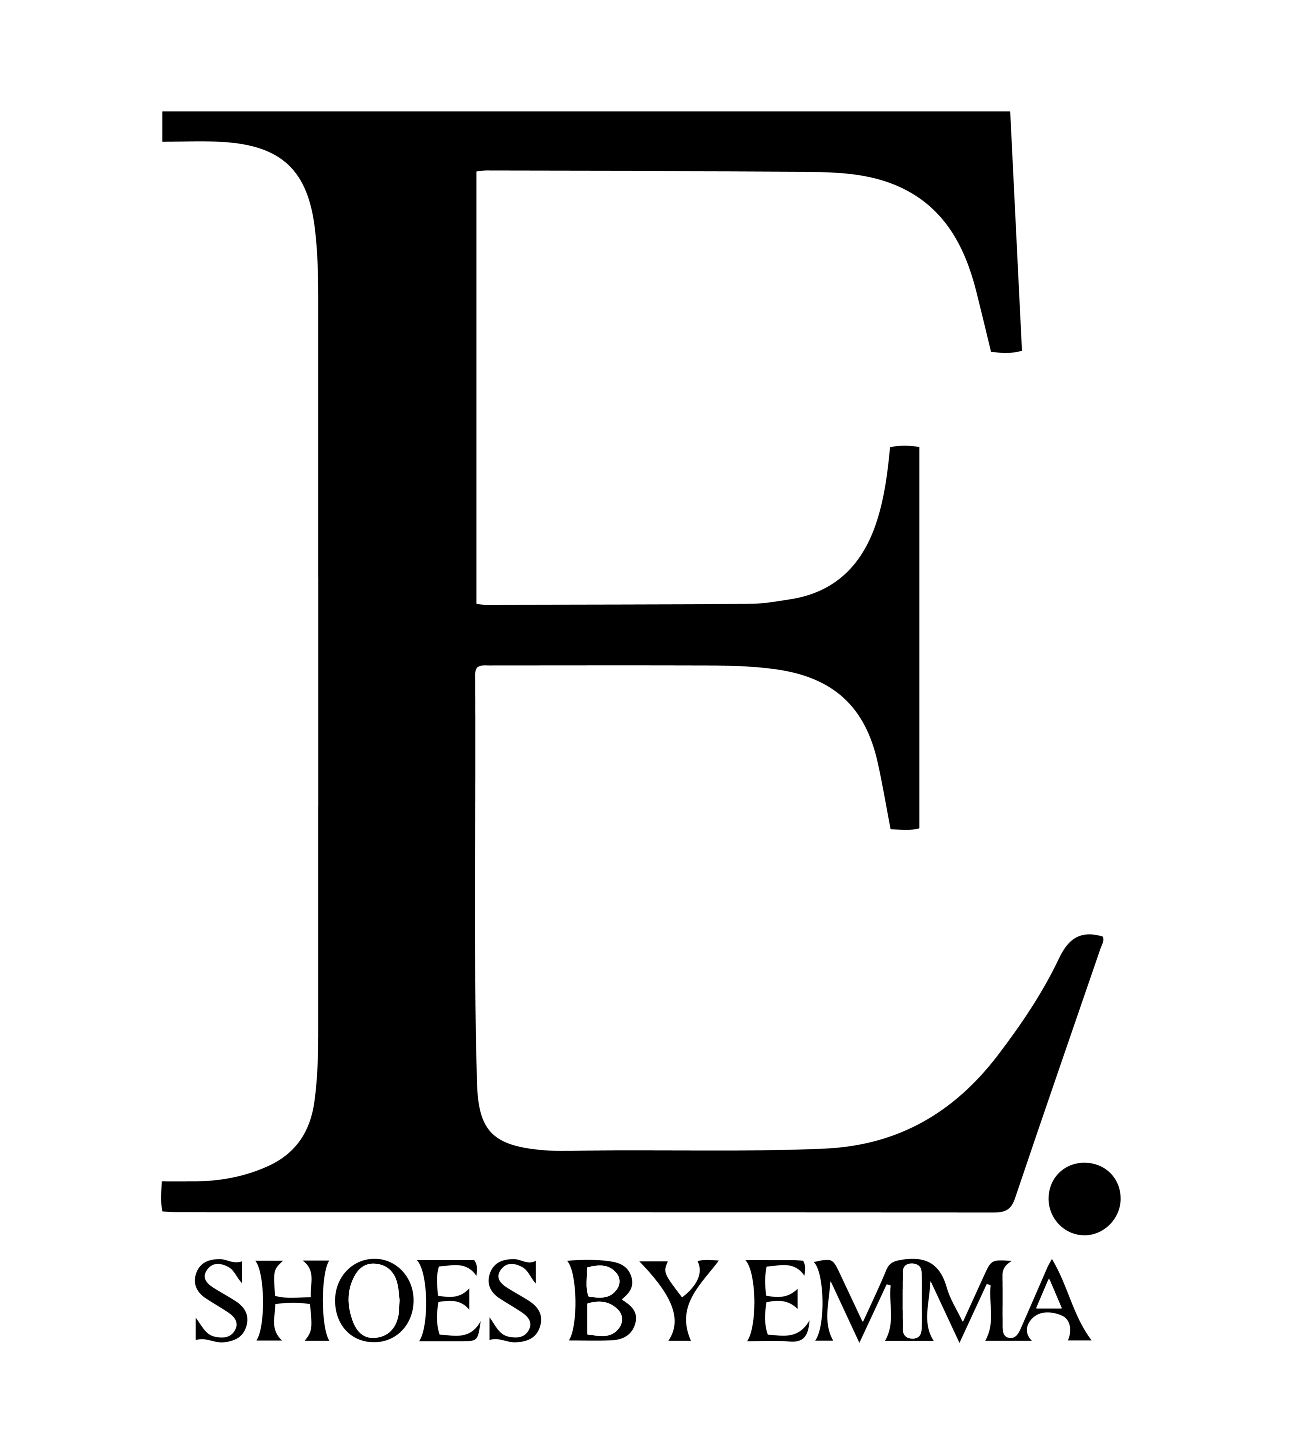 Shoes by Emma